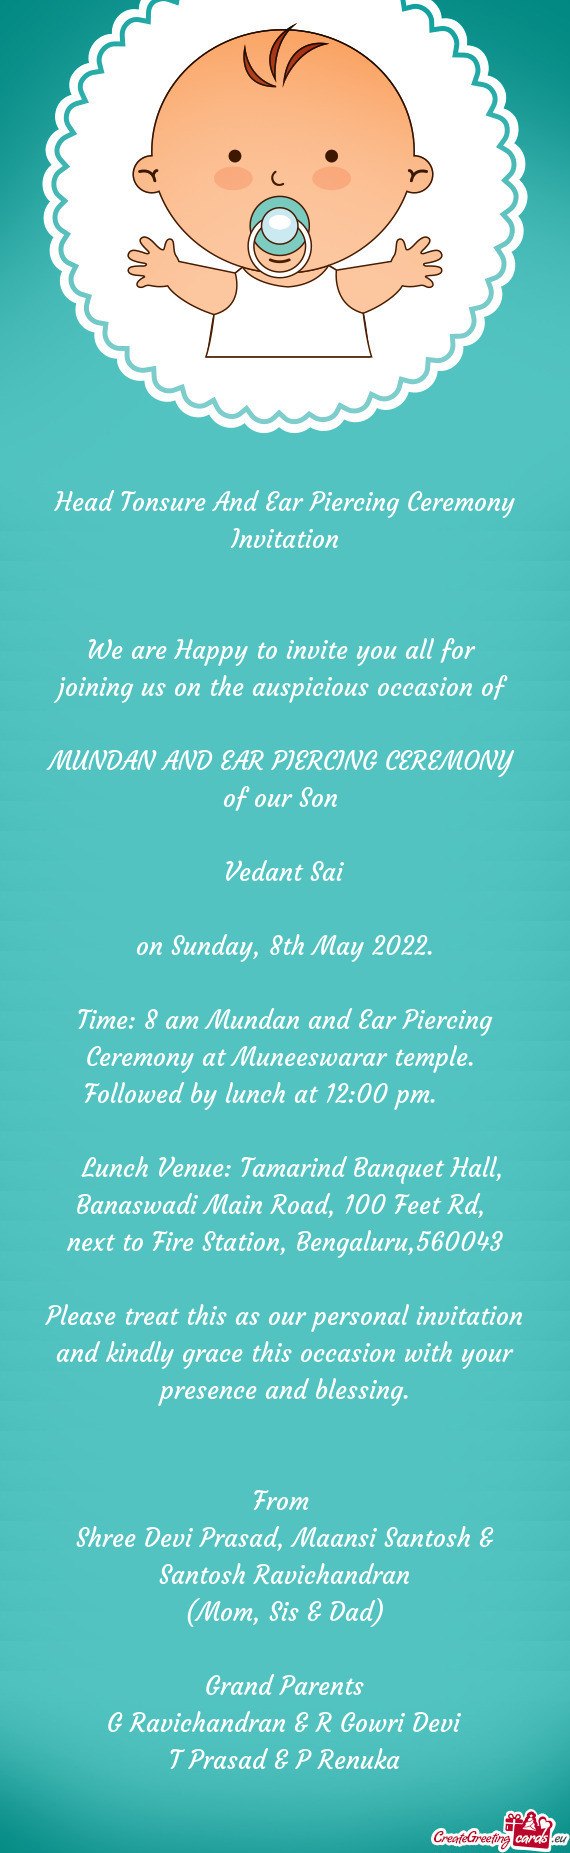 Time: 8 am Mundan and Ear Piercing Ceremony at Muneeswarar temple